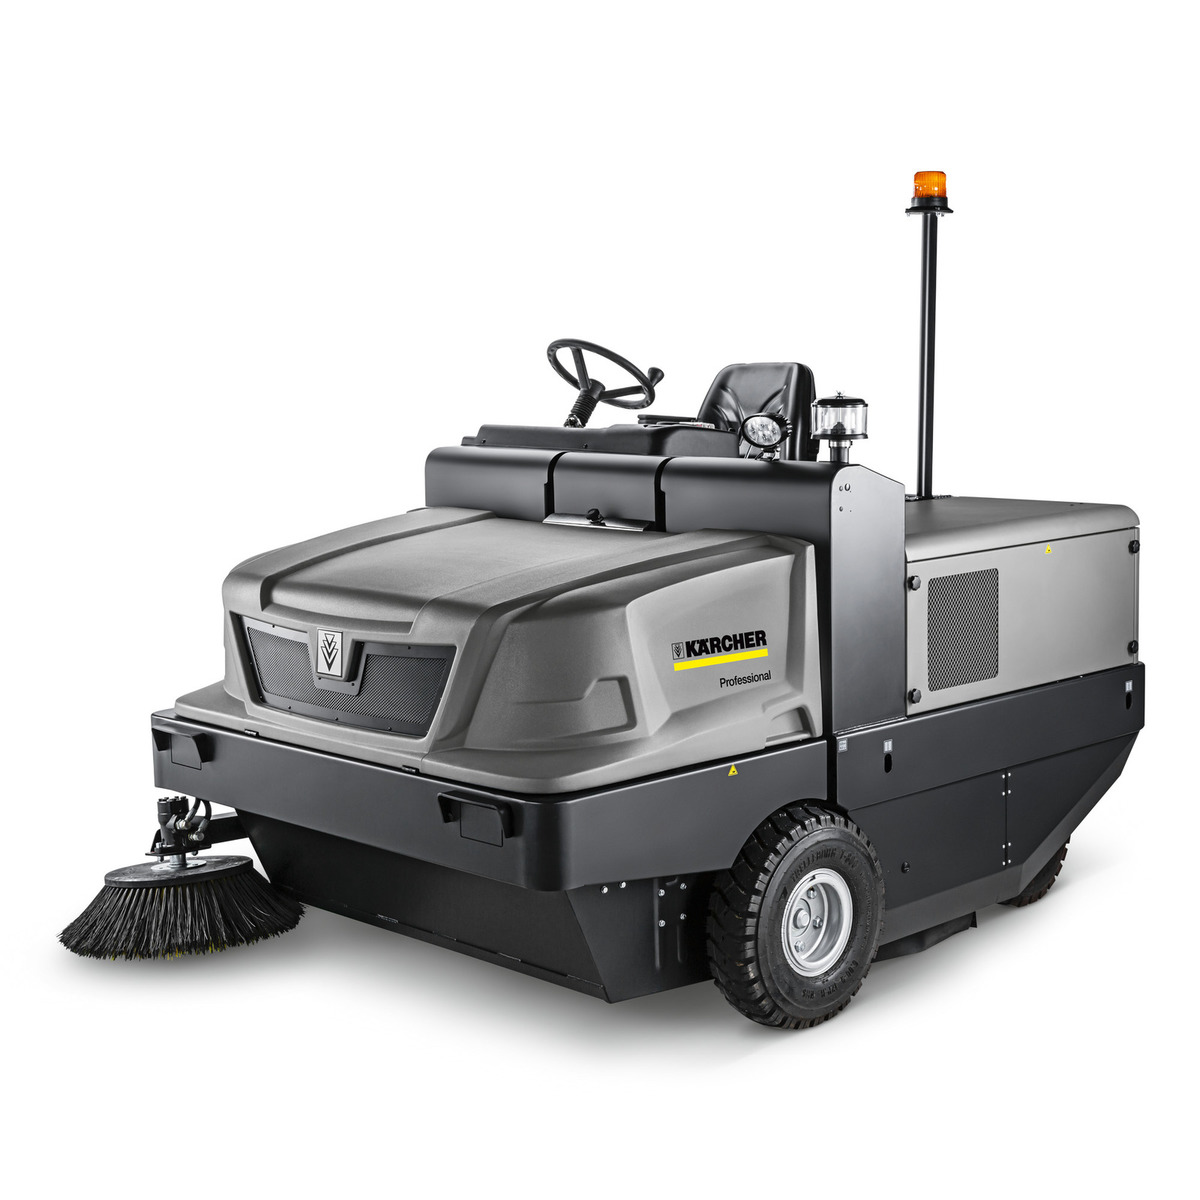 Karcher KM 170/600 R D Classic Karcher, sweeper,  KM, 170/600, R, D, Classic, ride, ride-on, sweeper, industrial, hard floor, commercial, janitorial, 